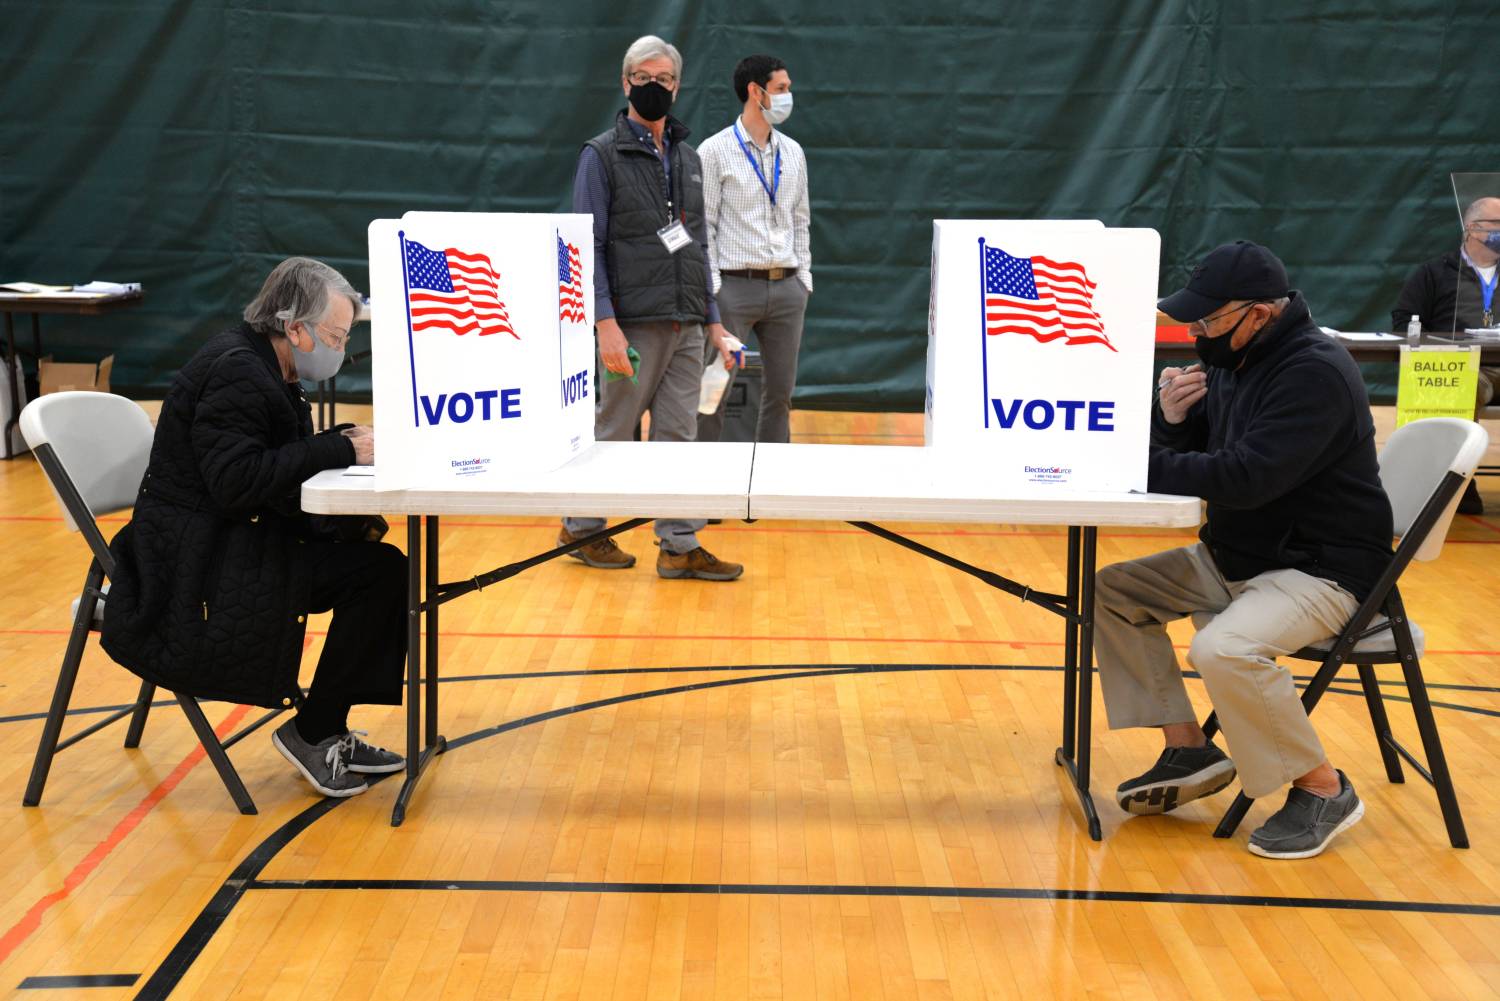 Voters in Ward 3 vote on Election Day on Nov. 3, 2020 at the Gypsy Hill Park Gym in Staunton.Dsc 9669